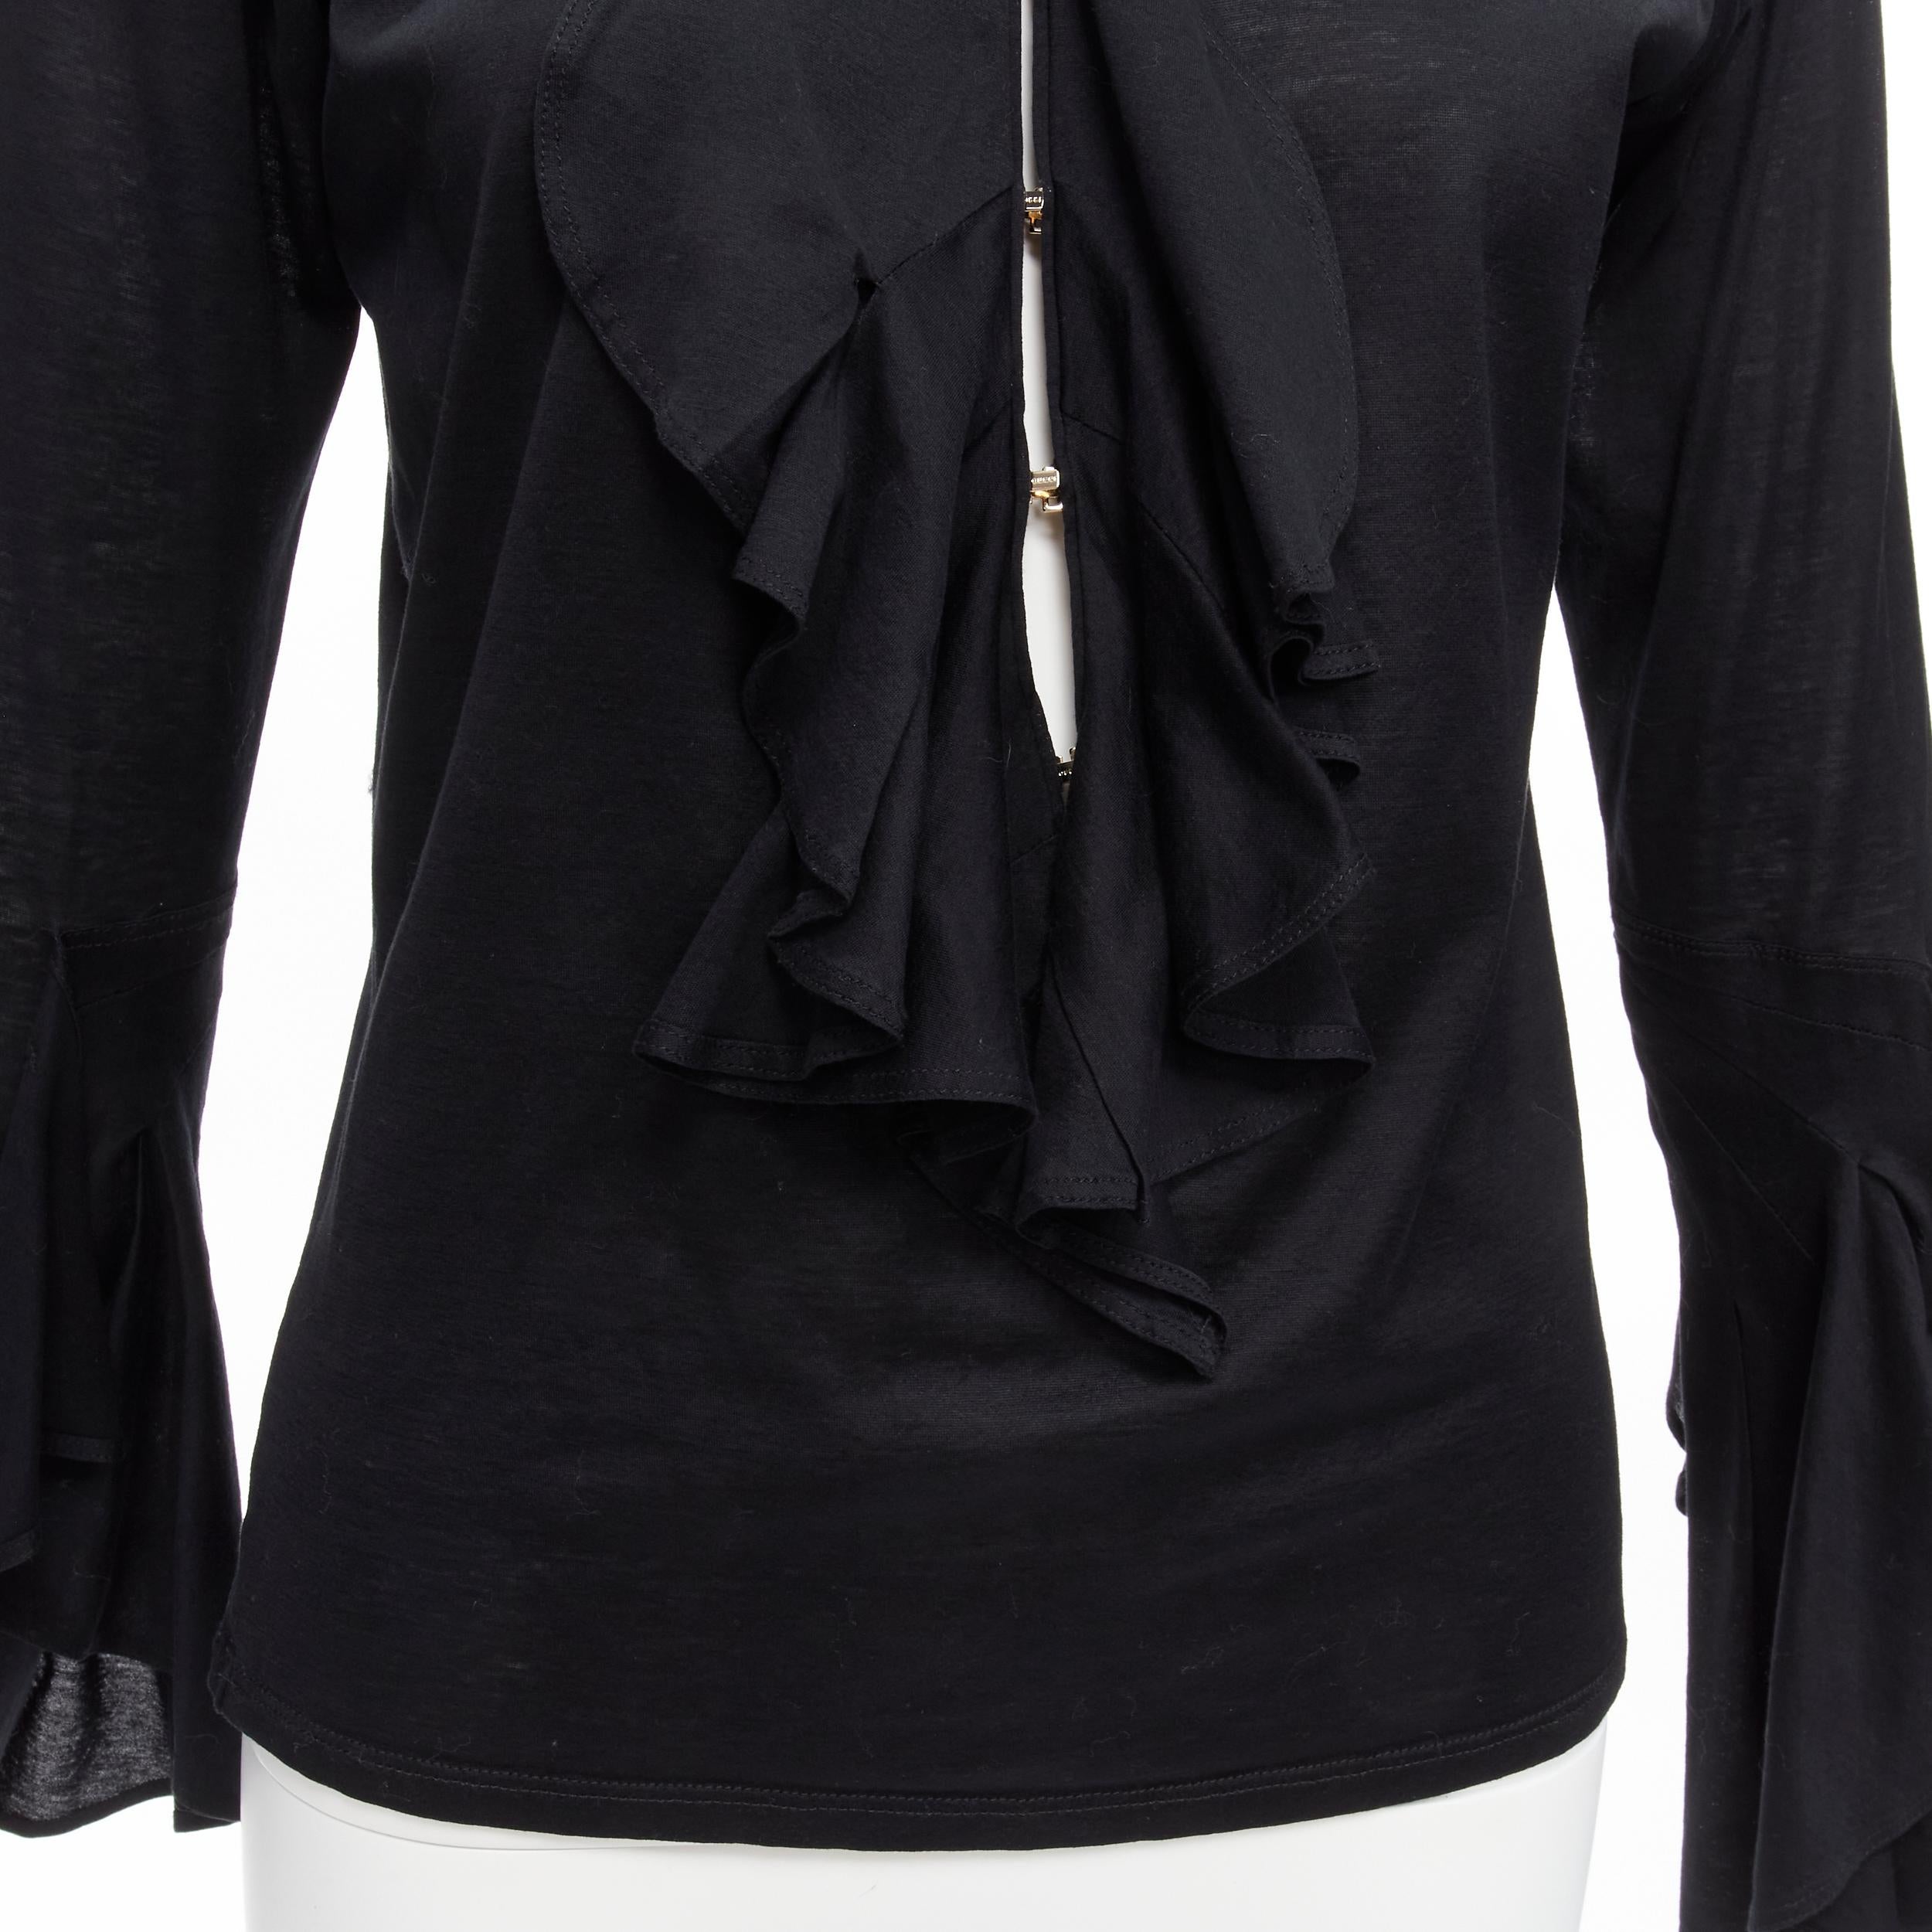 GUCCI Tom Ford Vintage black ruffle front velvet trim GG logo bell sleeves top S
Reference: TGAS/D00328
Brand: Gucci
Designer: Tom Ford
Material: Cotton
Color: Black
Pattern: Solid
Closure: Hook & Eye
Extra Details: GUCCI logo hook and eye front